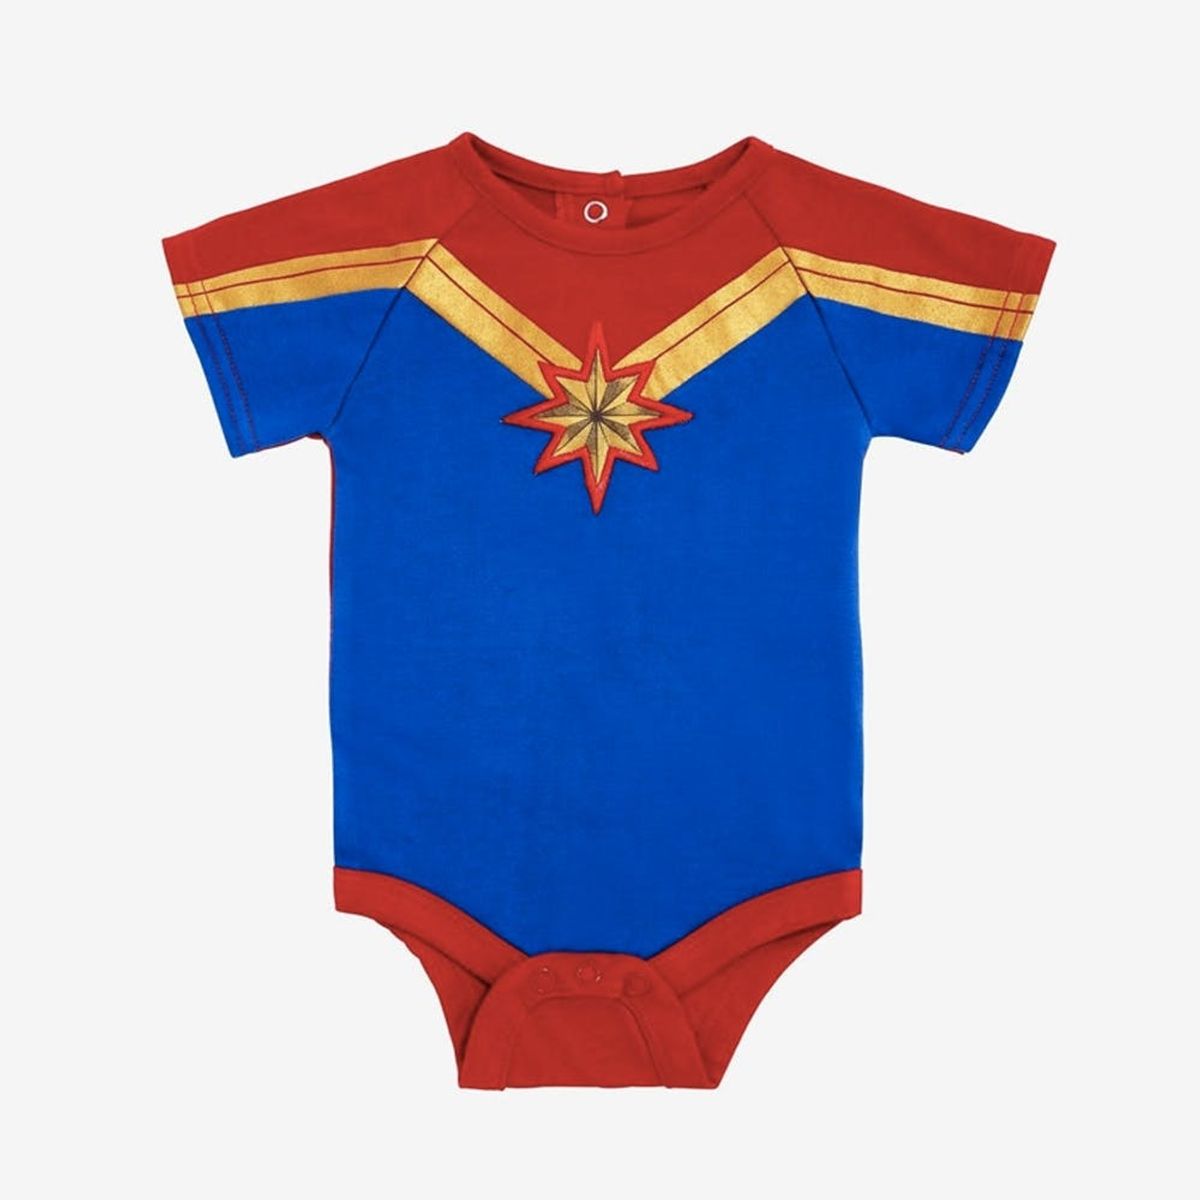 10 Out-of-This-World Kids’ Outfits for Your Littlest Superhero